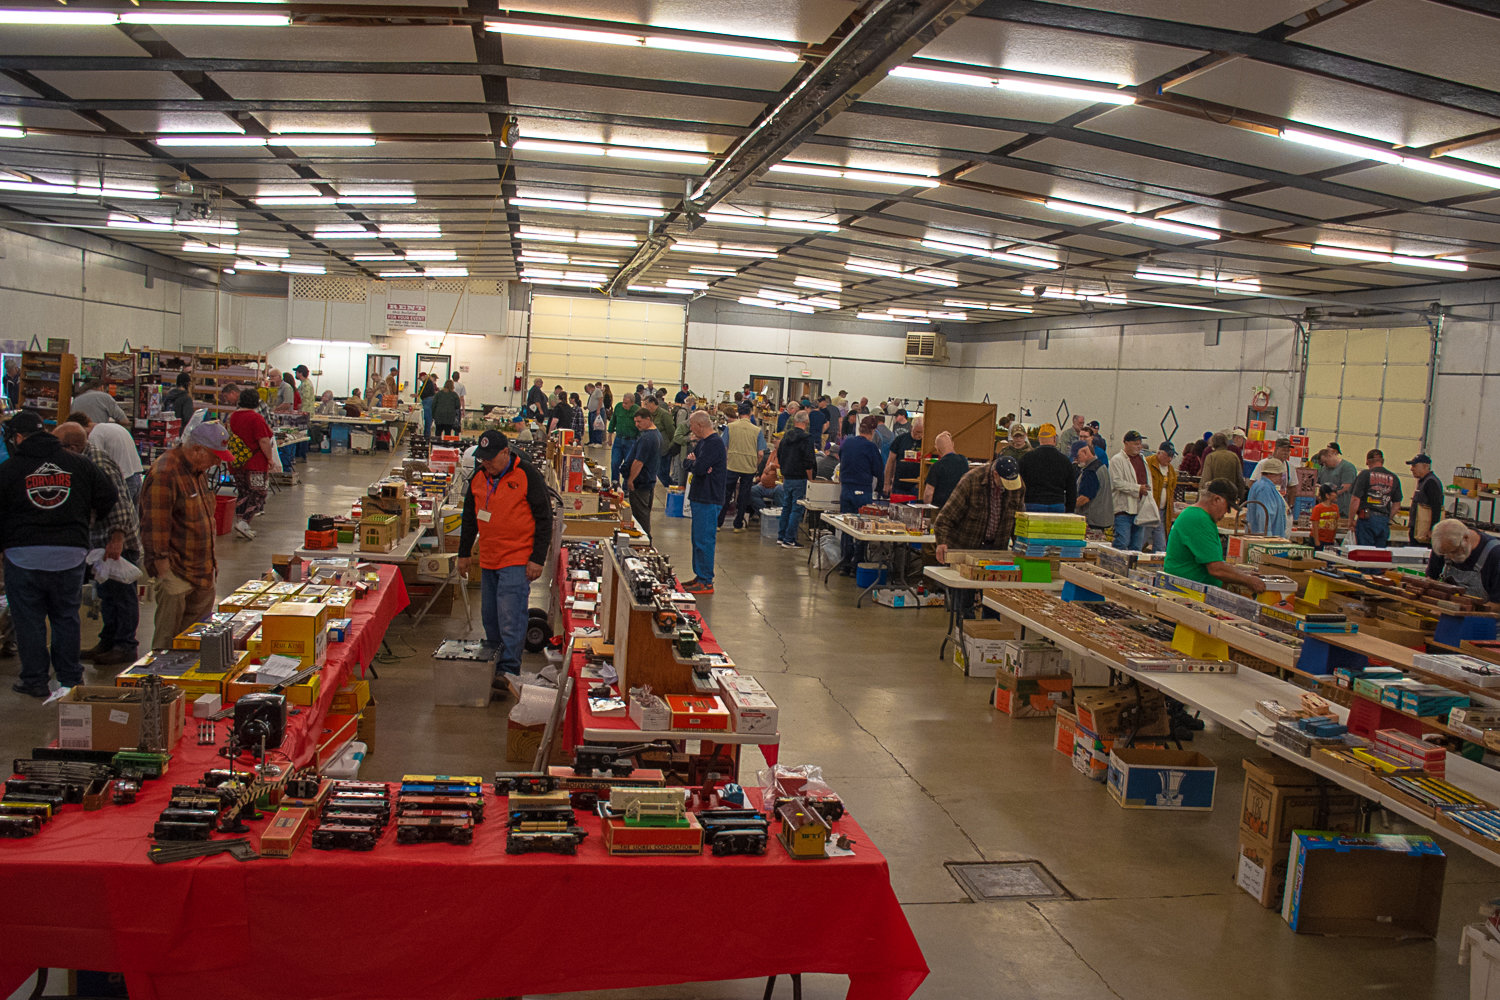 Hundreds of people filed through on Saturday morning at the Lewis County Model Railroad Club Swap Meet to buy and sell model trains and accessories.